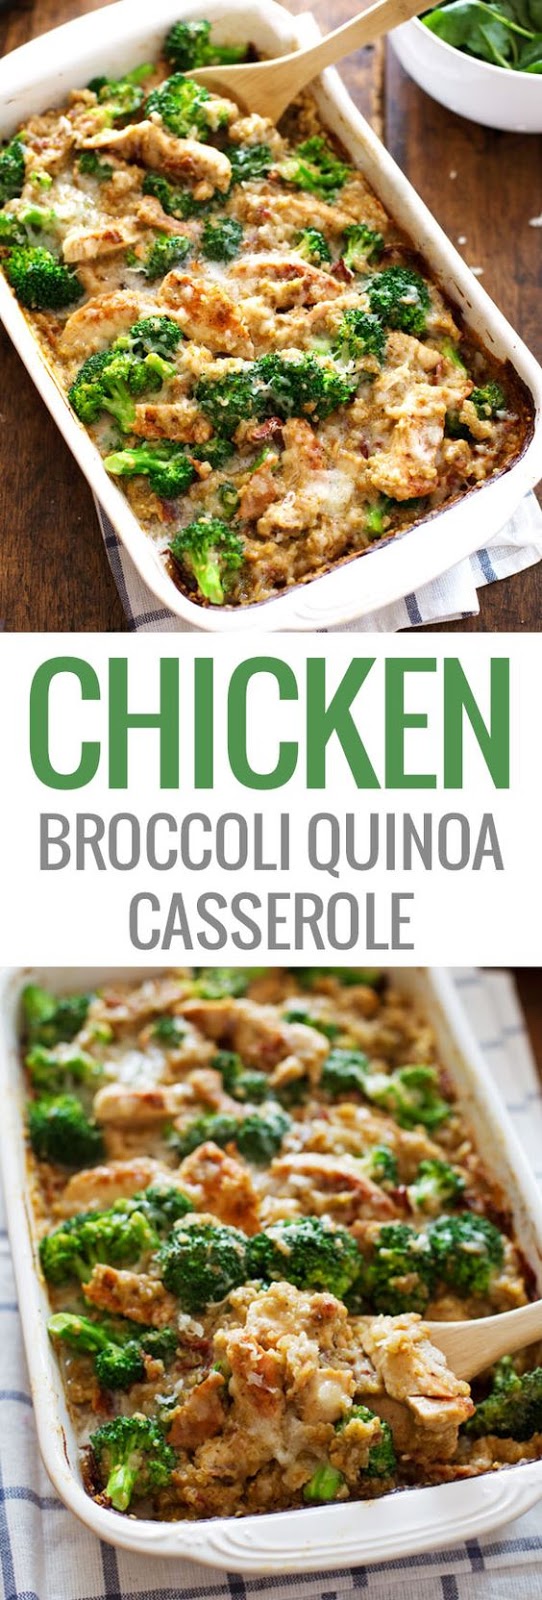 Creamy Chicken Quinoa and Broccoli Casserole - real food meets comfort food. From scratch, quick and easy, 350 calories. | pinchofyum.com